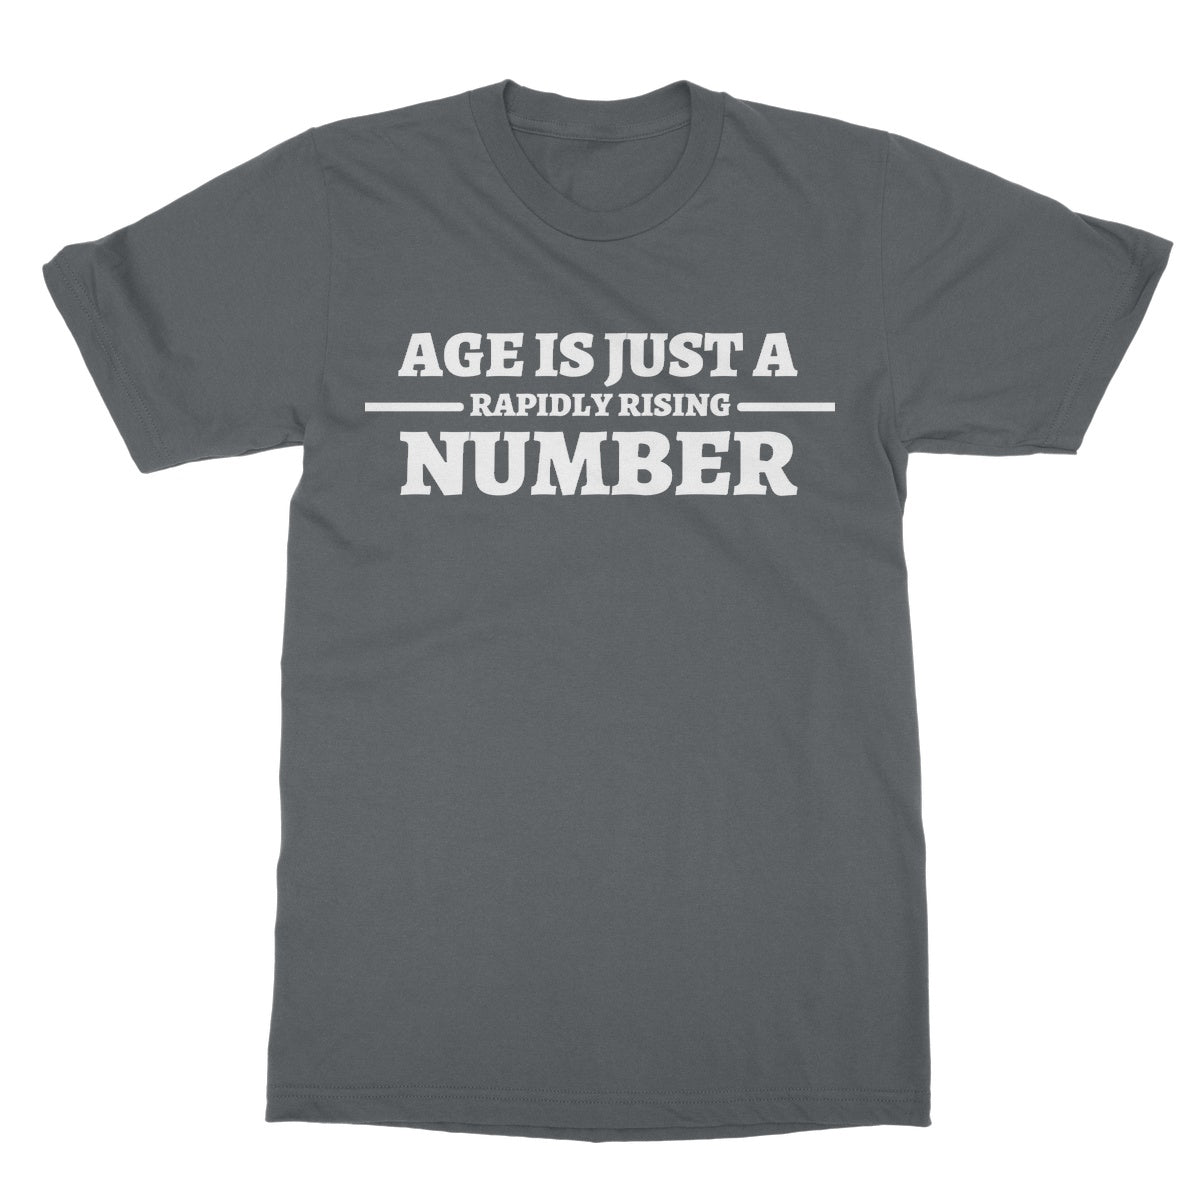 age is just a number t shirt grey